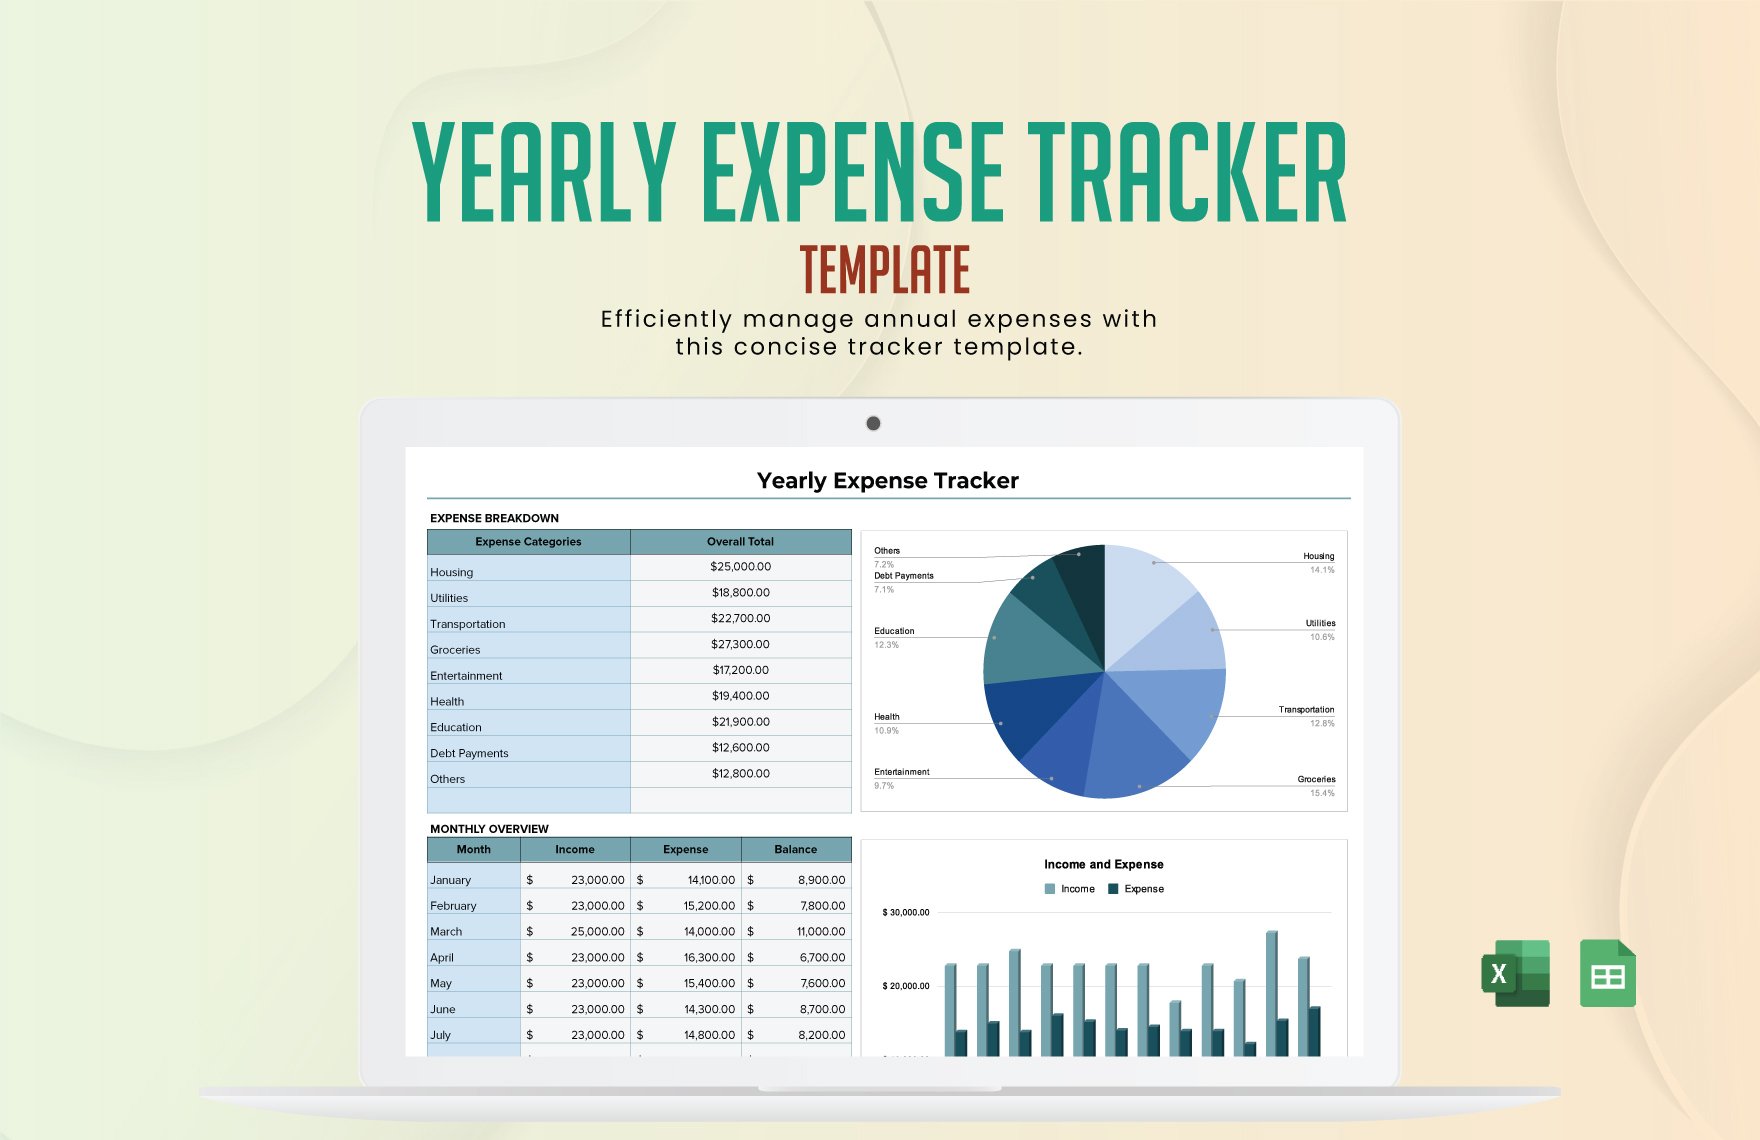 Yearly Expense Tracker Template in Excel, Google Sheets